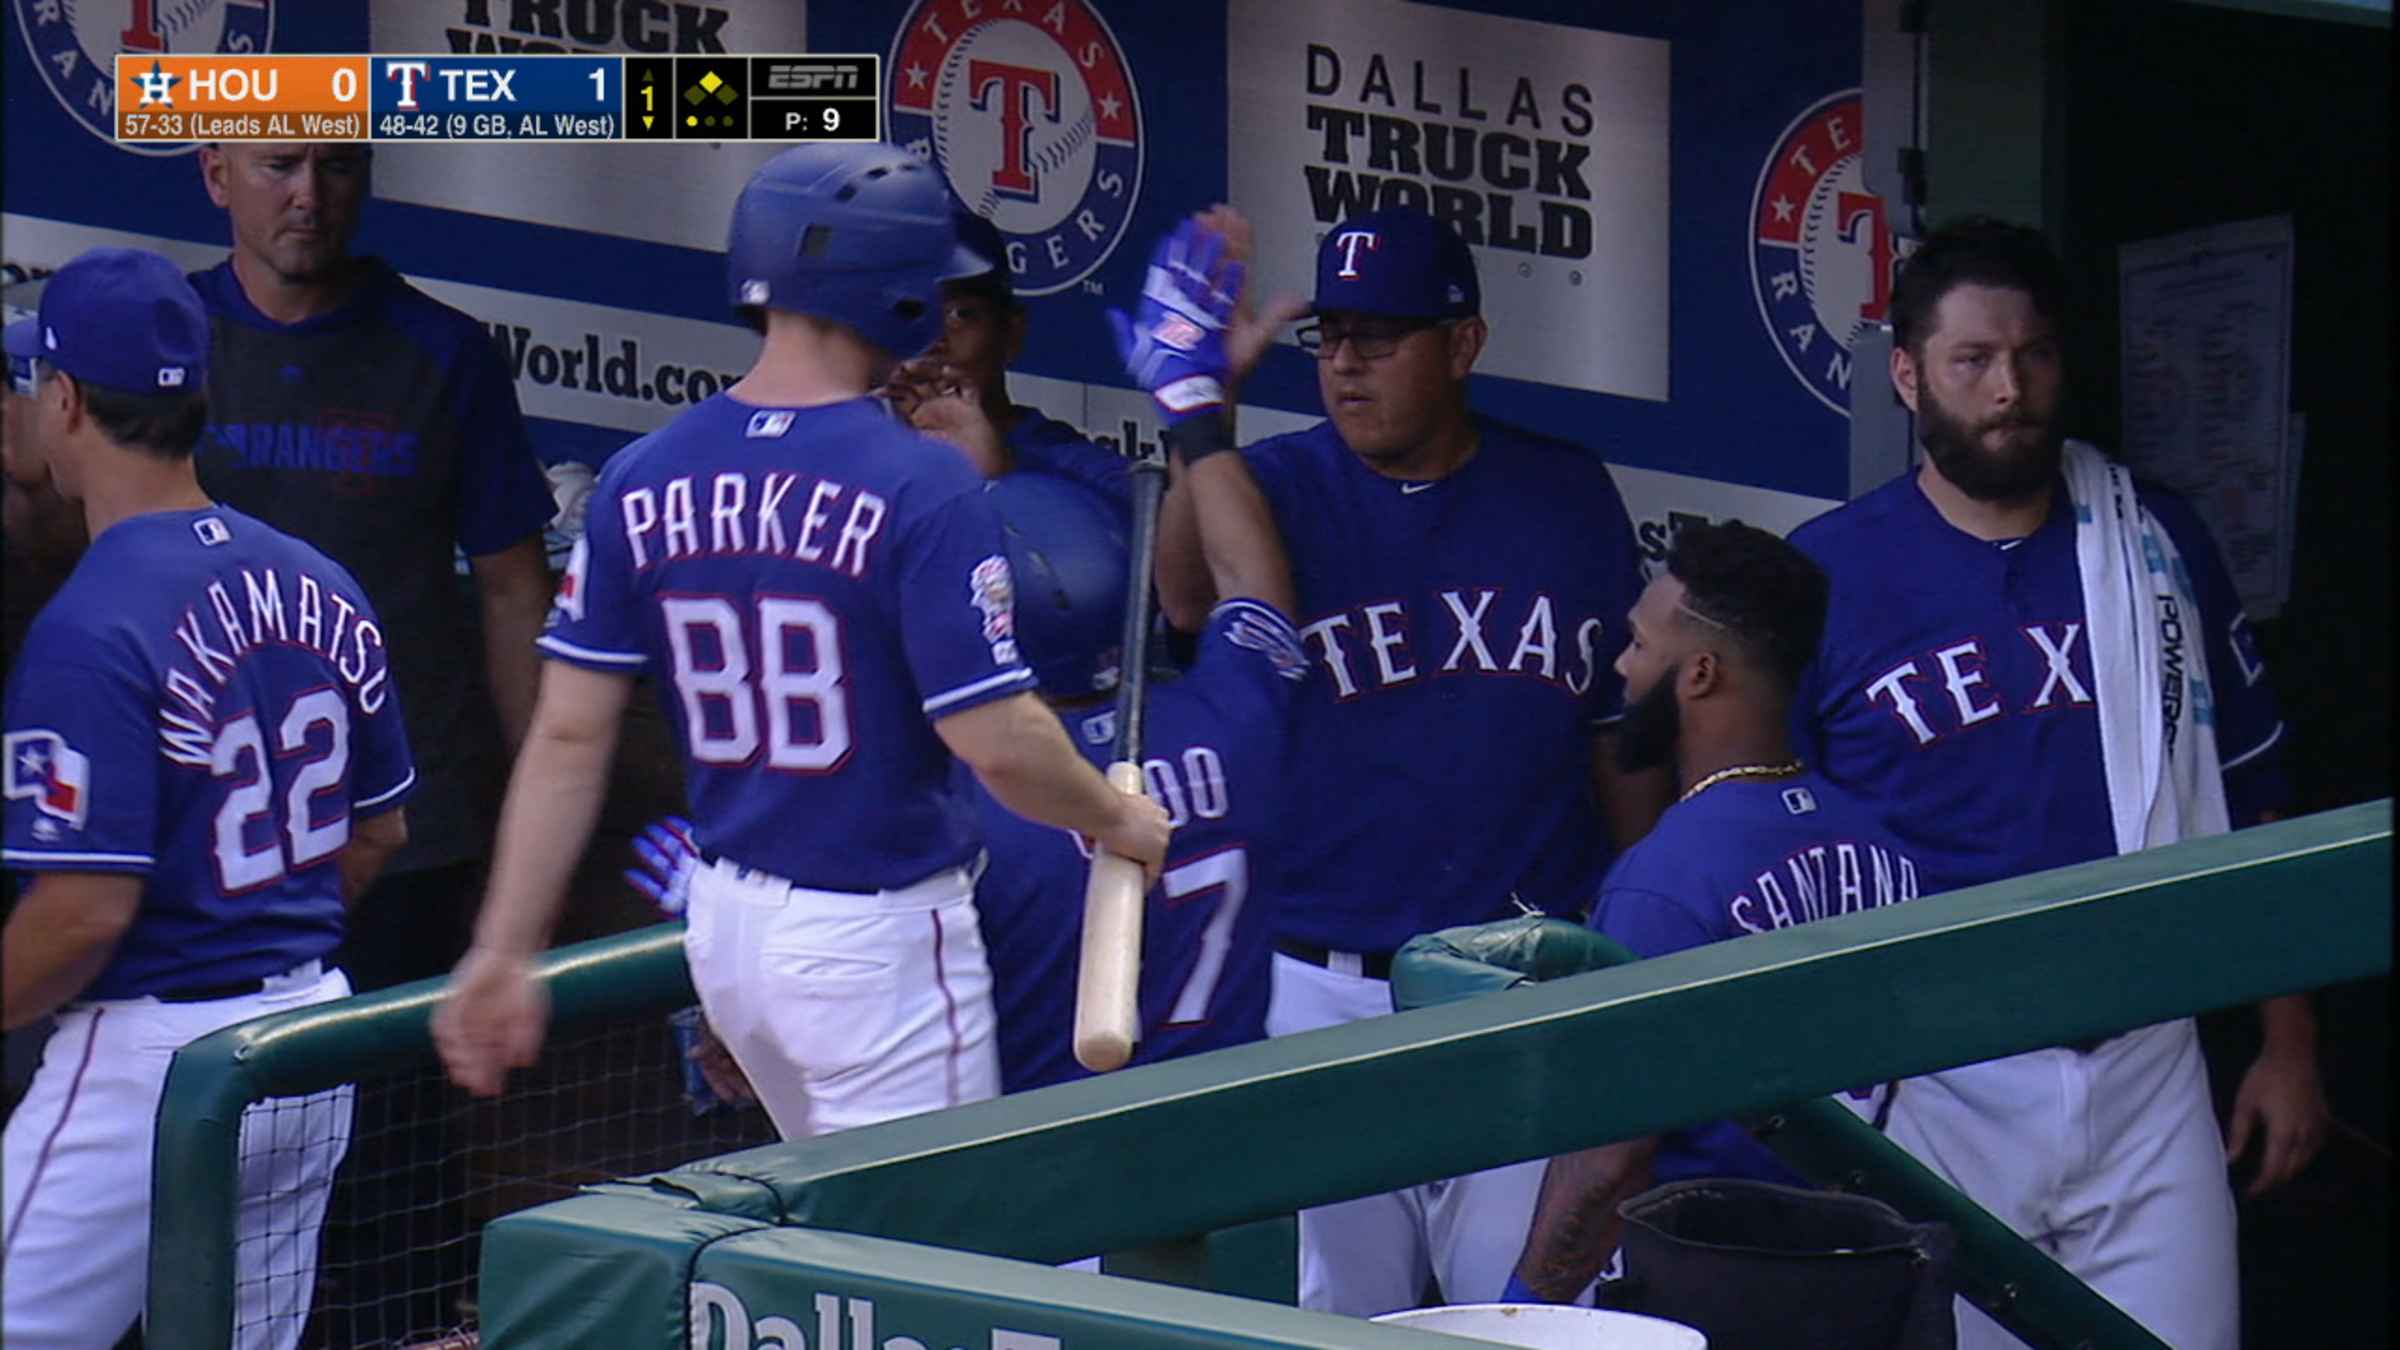 Kinsler, Andrus lead Rangers past Tigers, 7-3 - The San Diego